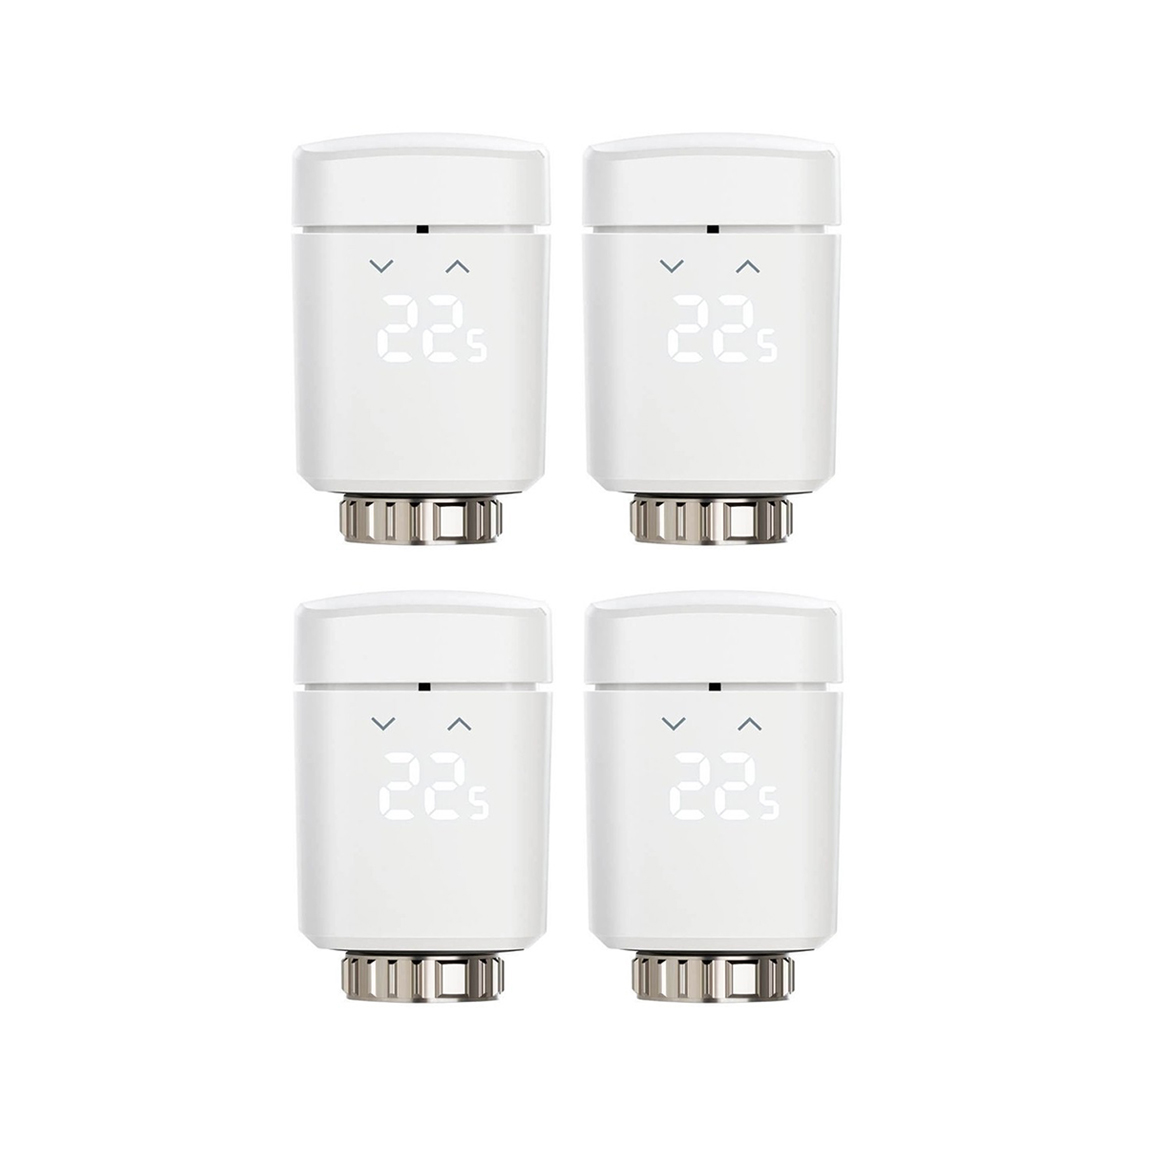 Eve Thermo (2020) 4-pack